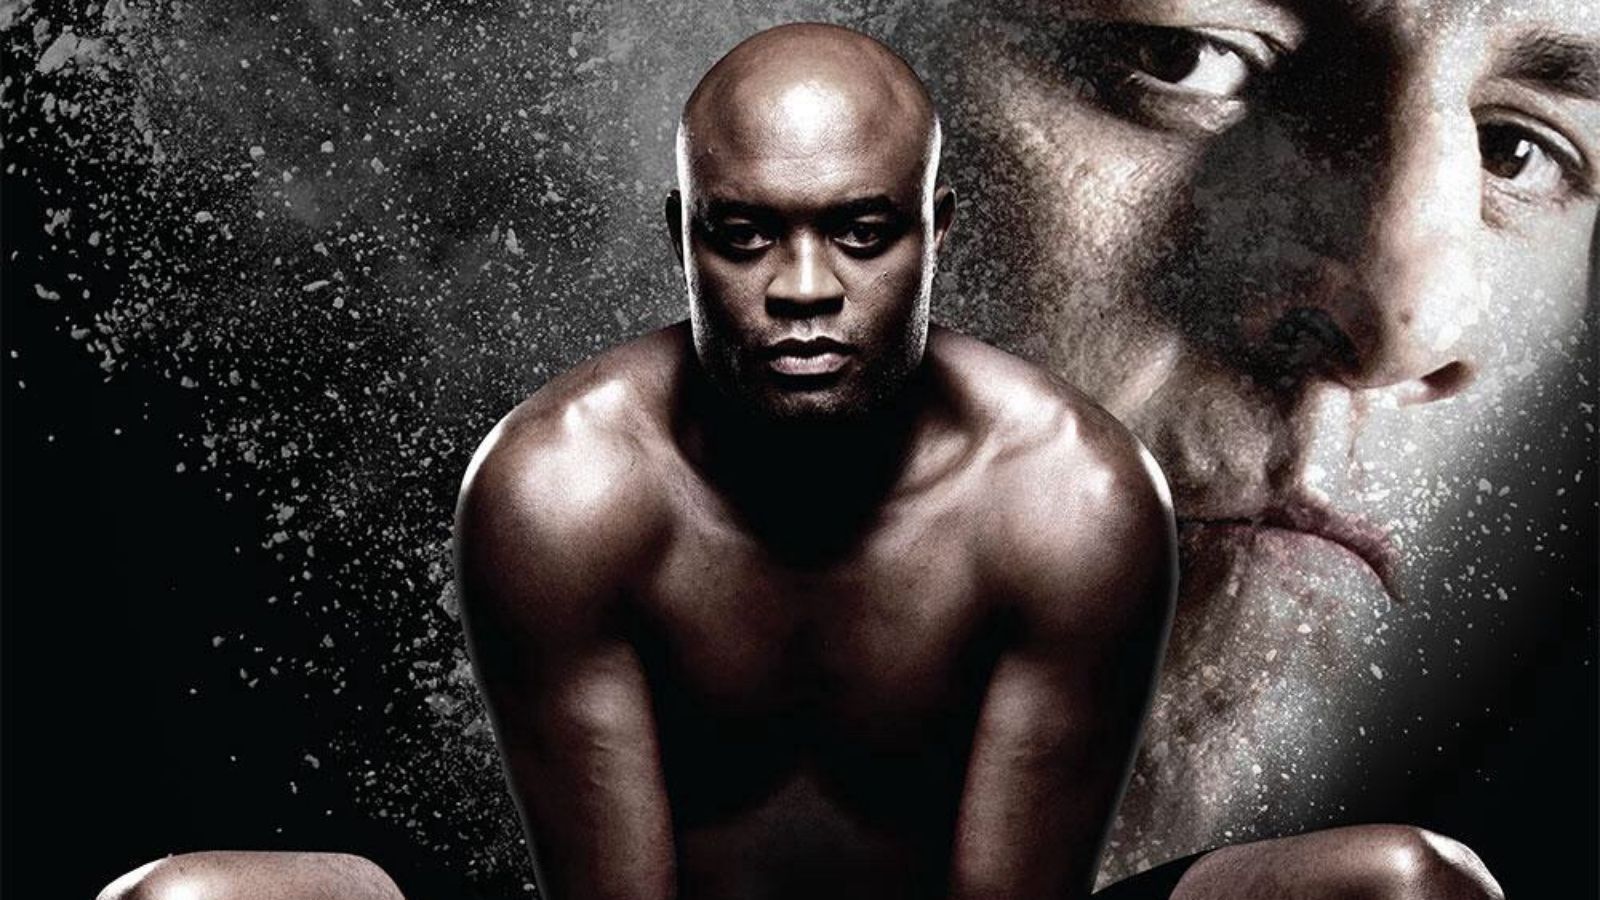 The return of the Spider - Anderson Silva vs. Nick Diaz - Fitness 101